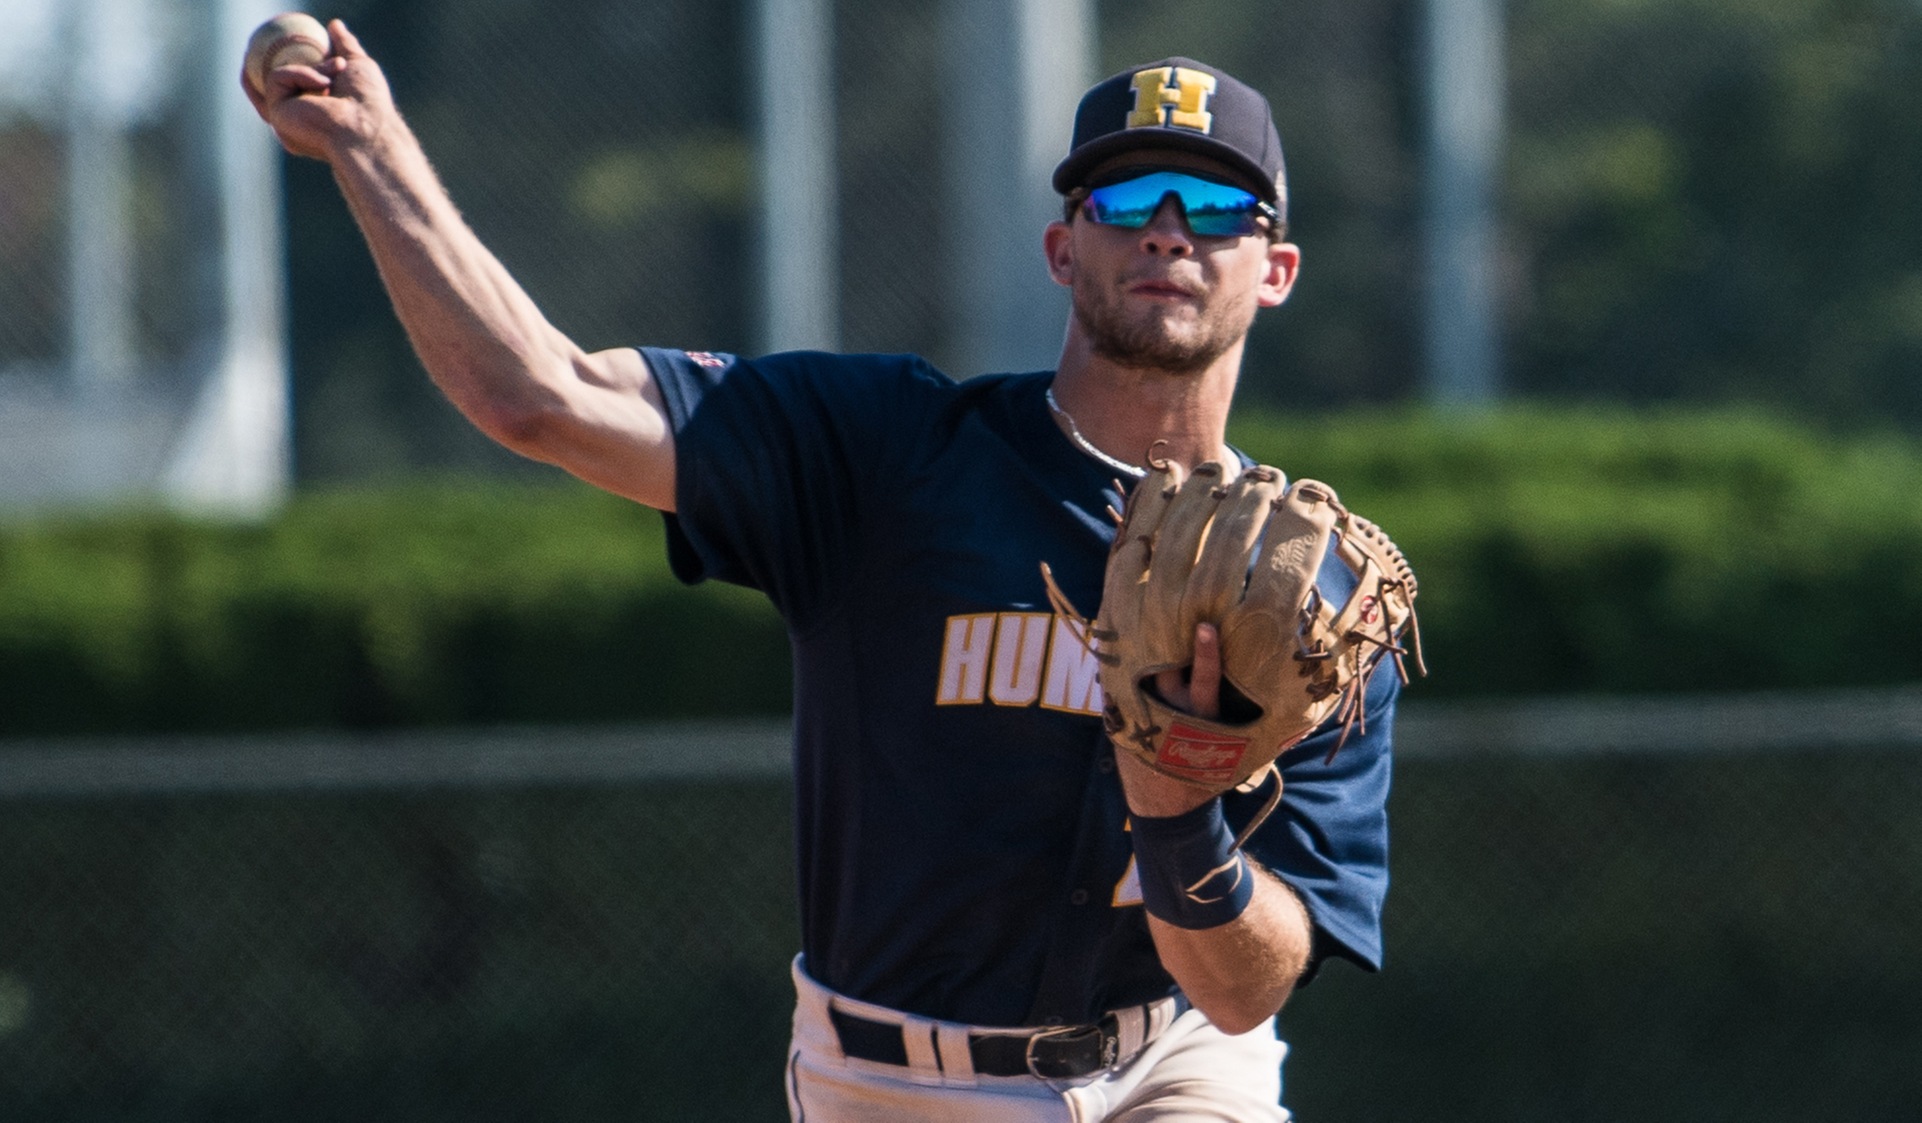 HAWKS EXPLODE IN BACK-TO-BACK ROAD WINS - SIGMUND WITH GAME 2 NO-NO